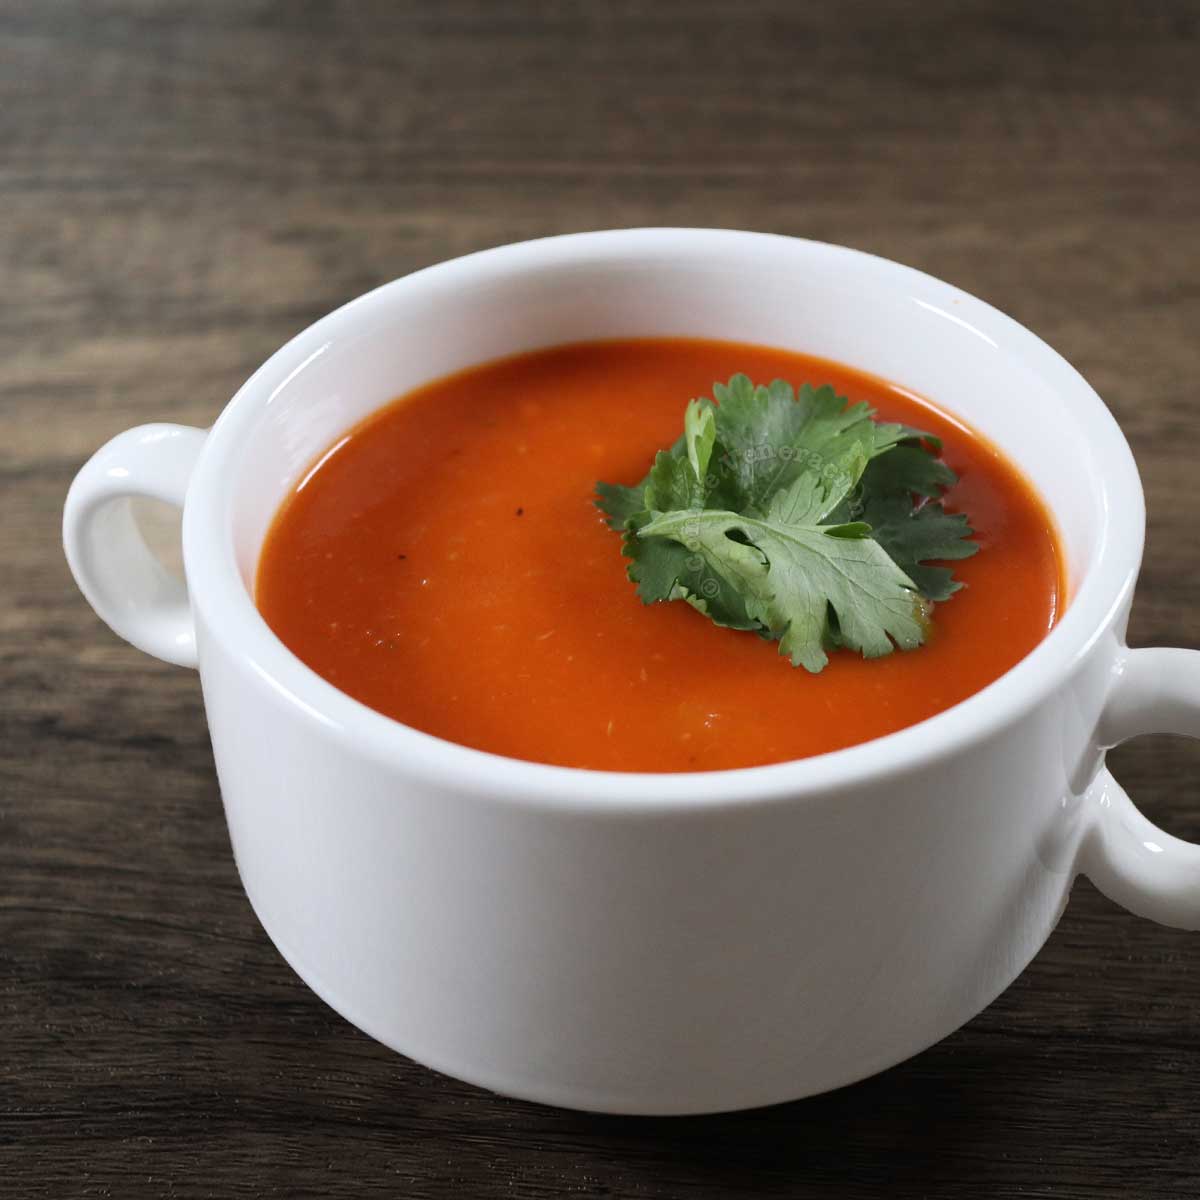 Tomato soup garnished with cilantro